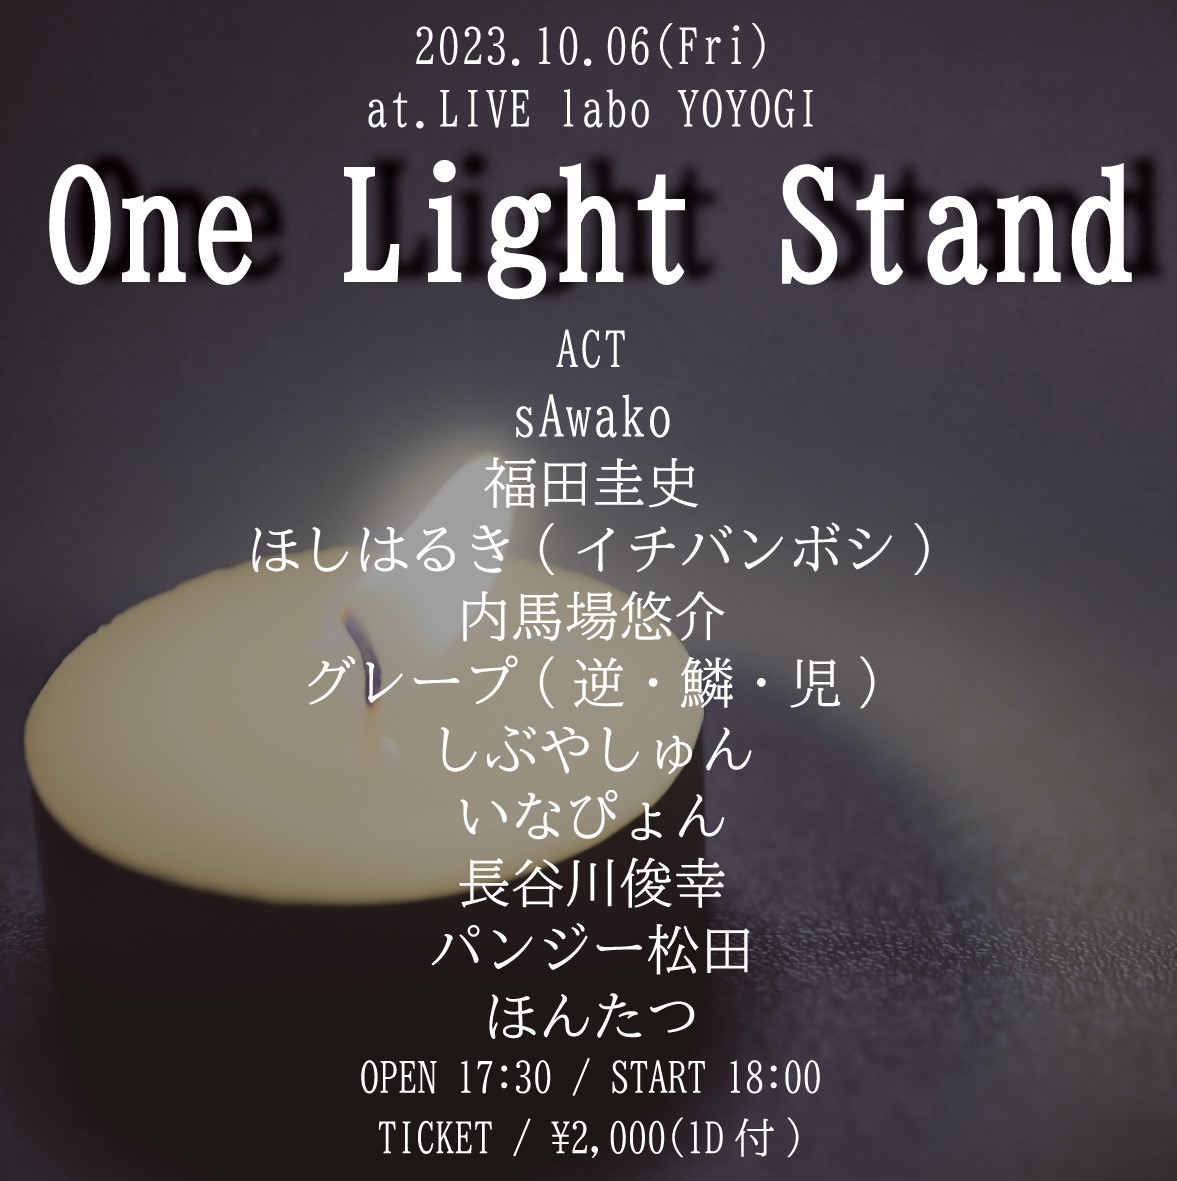 One Light Stand